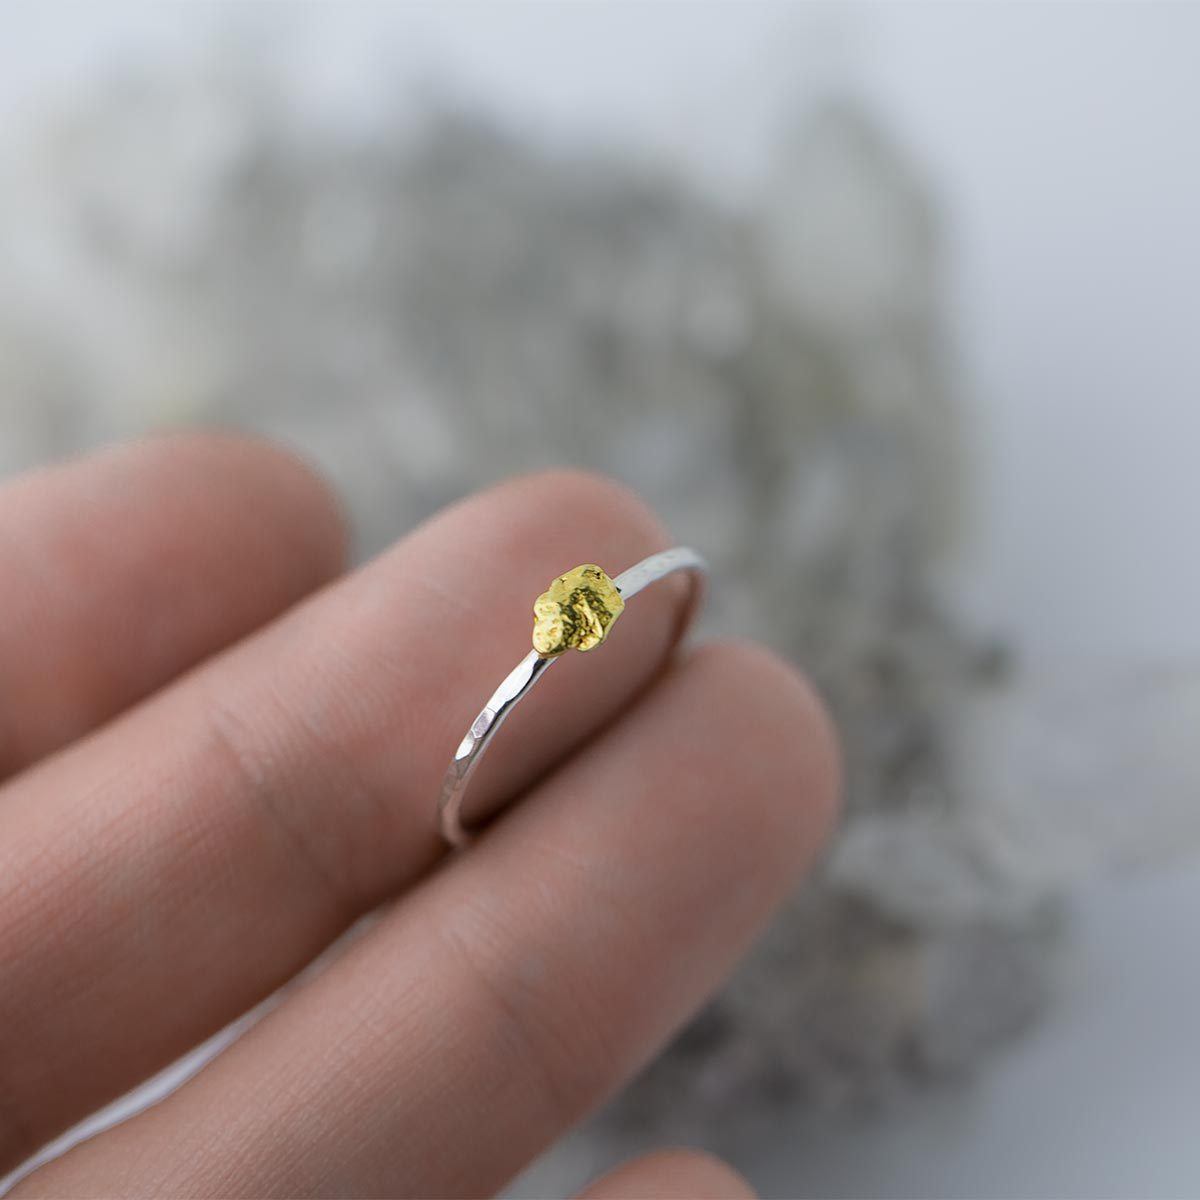 Alaska Gold Nugget & Sterling Silver Ring - Handmade Jewelry by Burnish